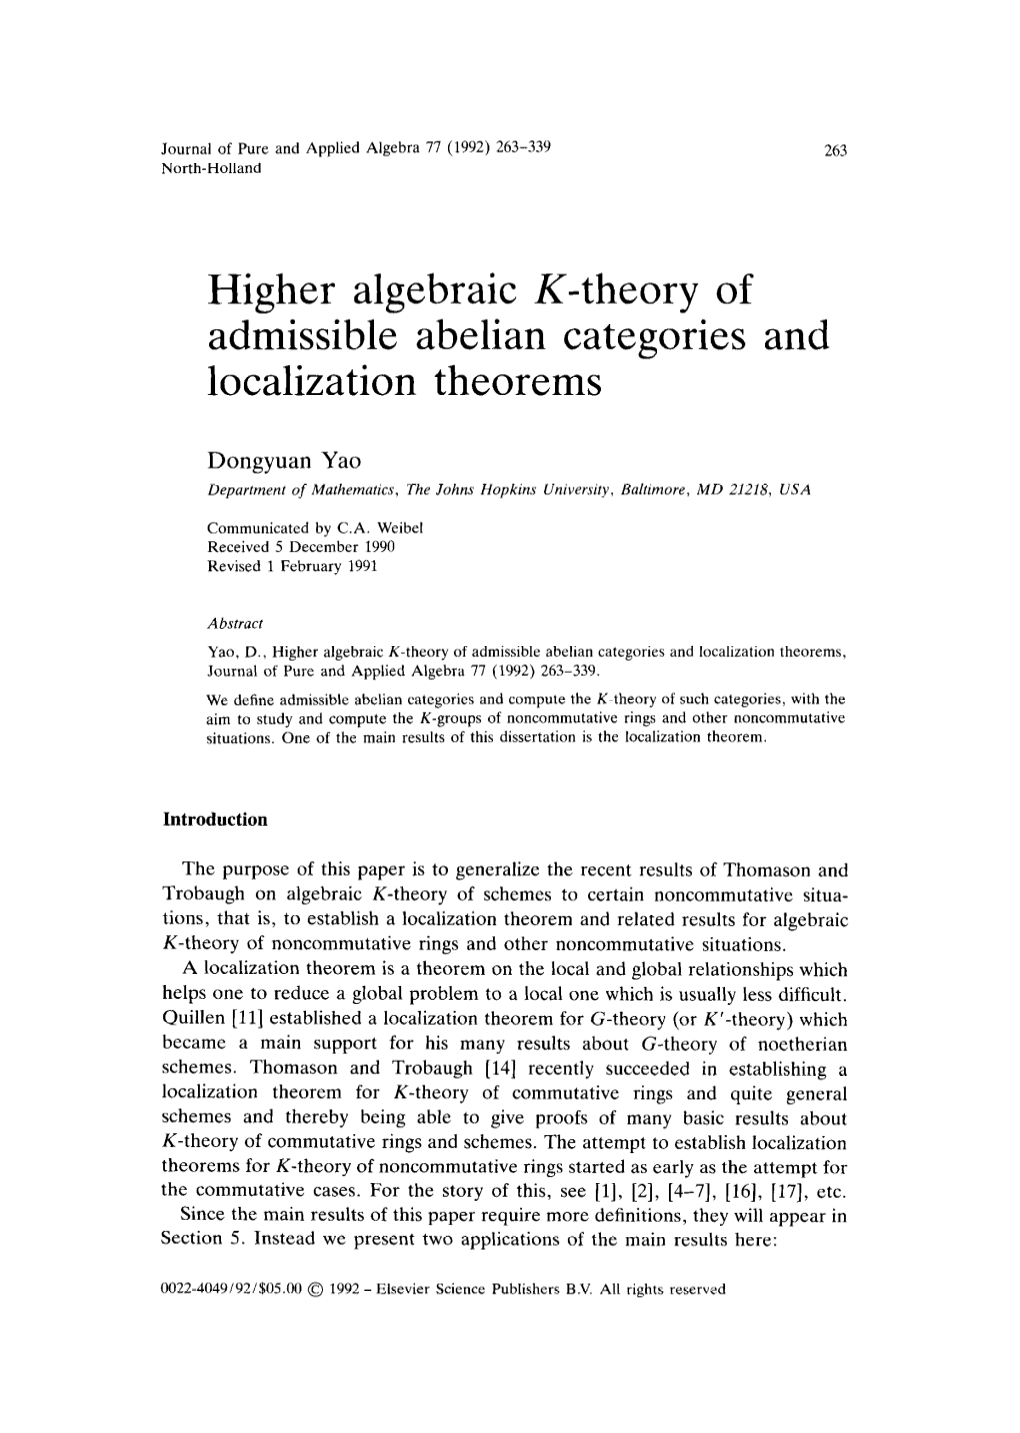 Higher Algebraic K-Theory of Admissible Abelian Categories and Localization Theorems